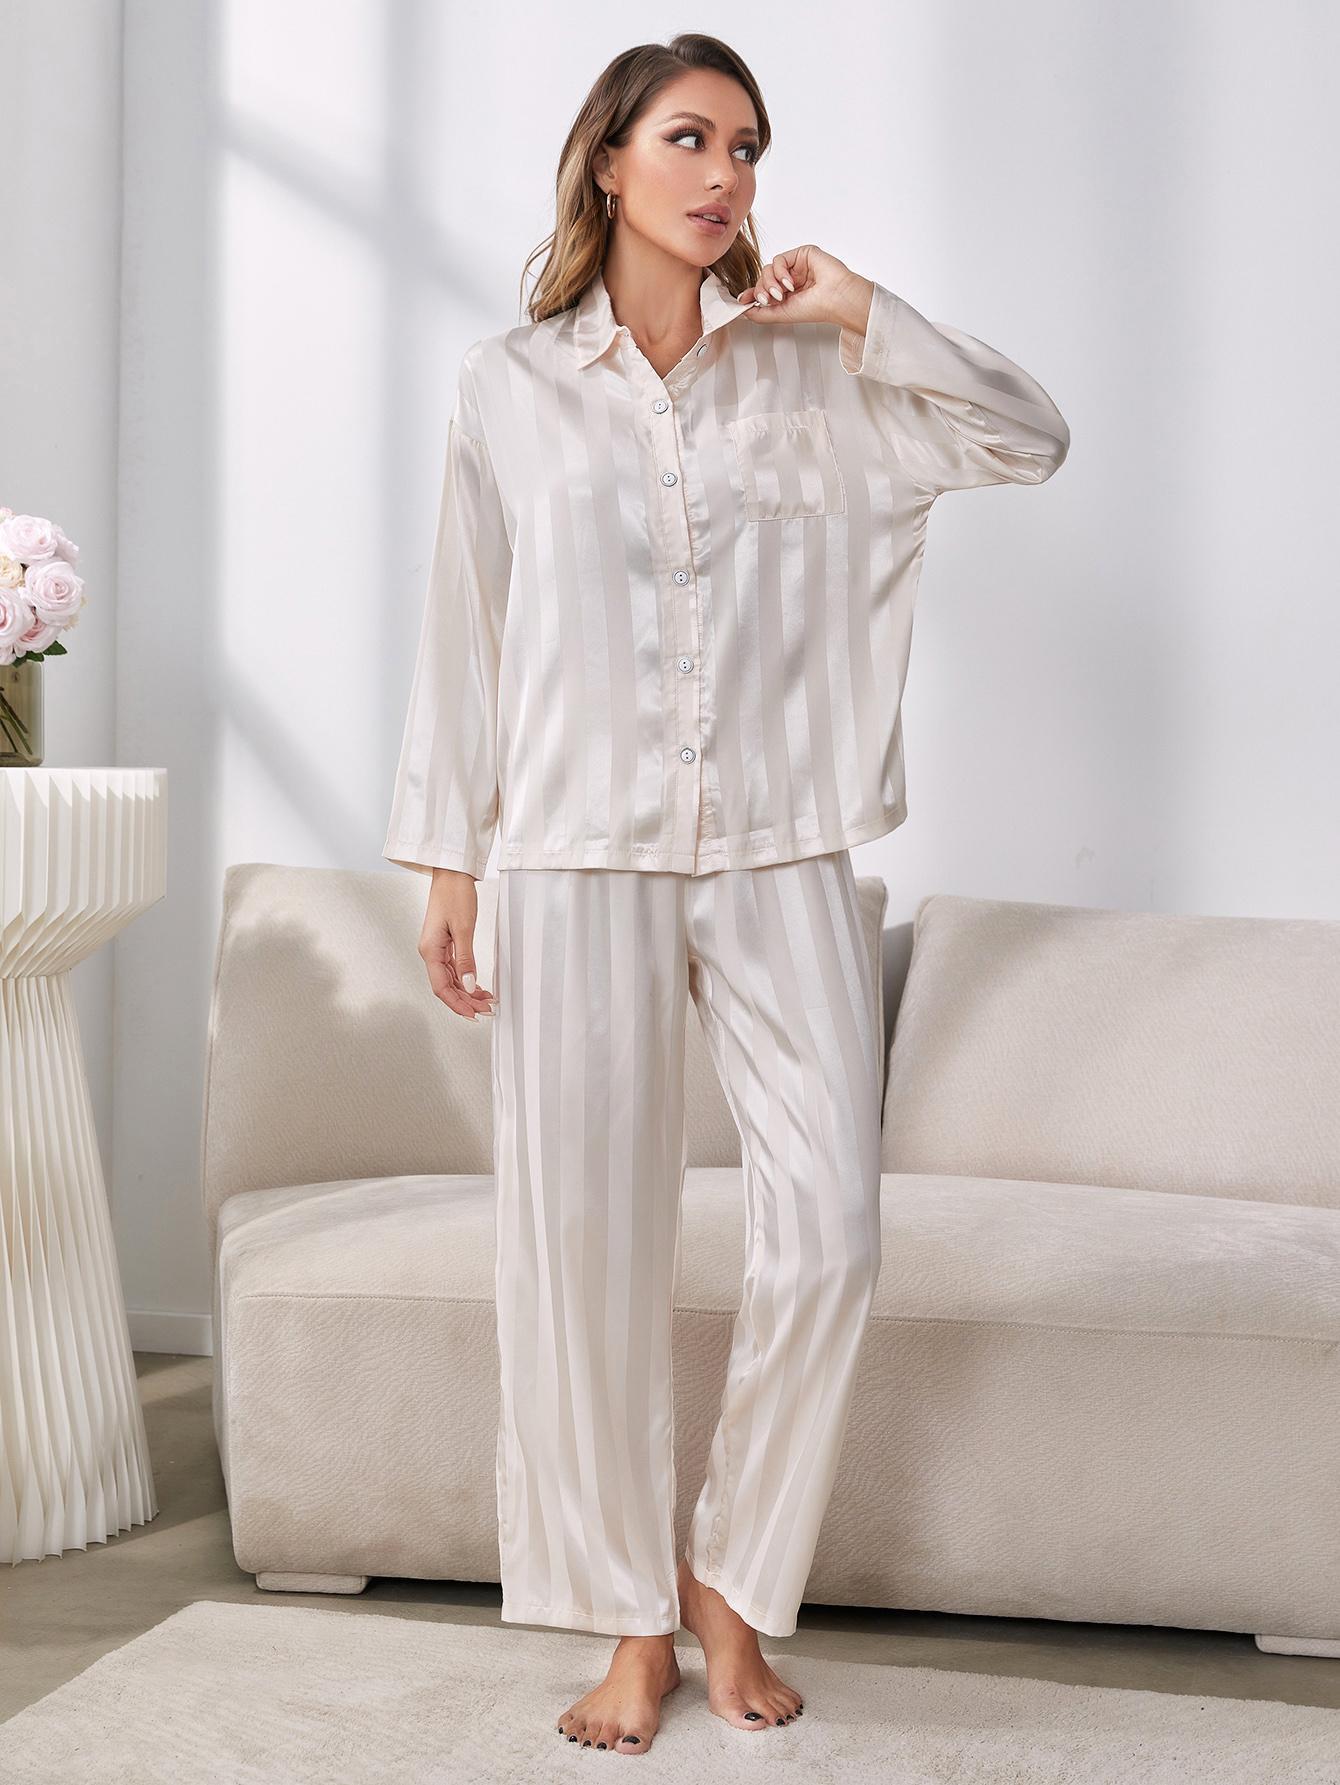 Button-Up Shirt and Pants Pajama Set - White / S Apparel & Accessories Girl Code